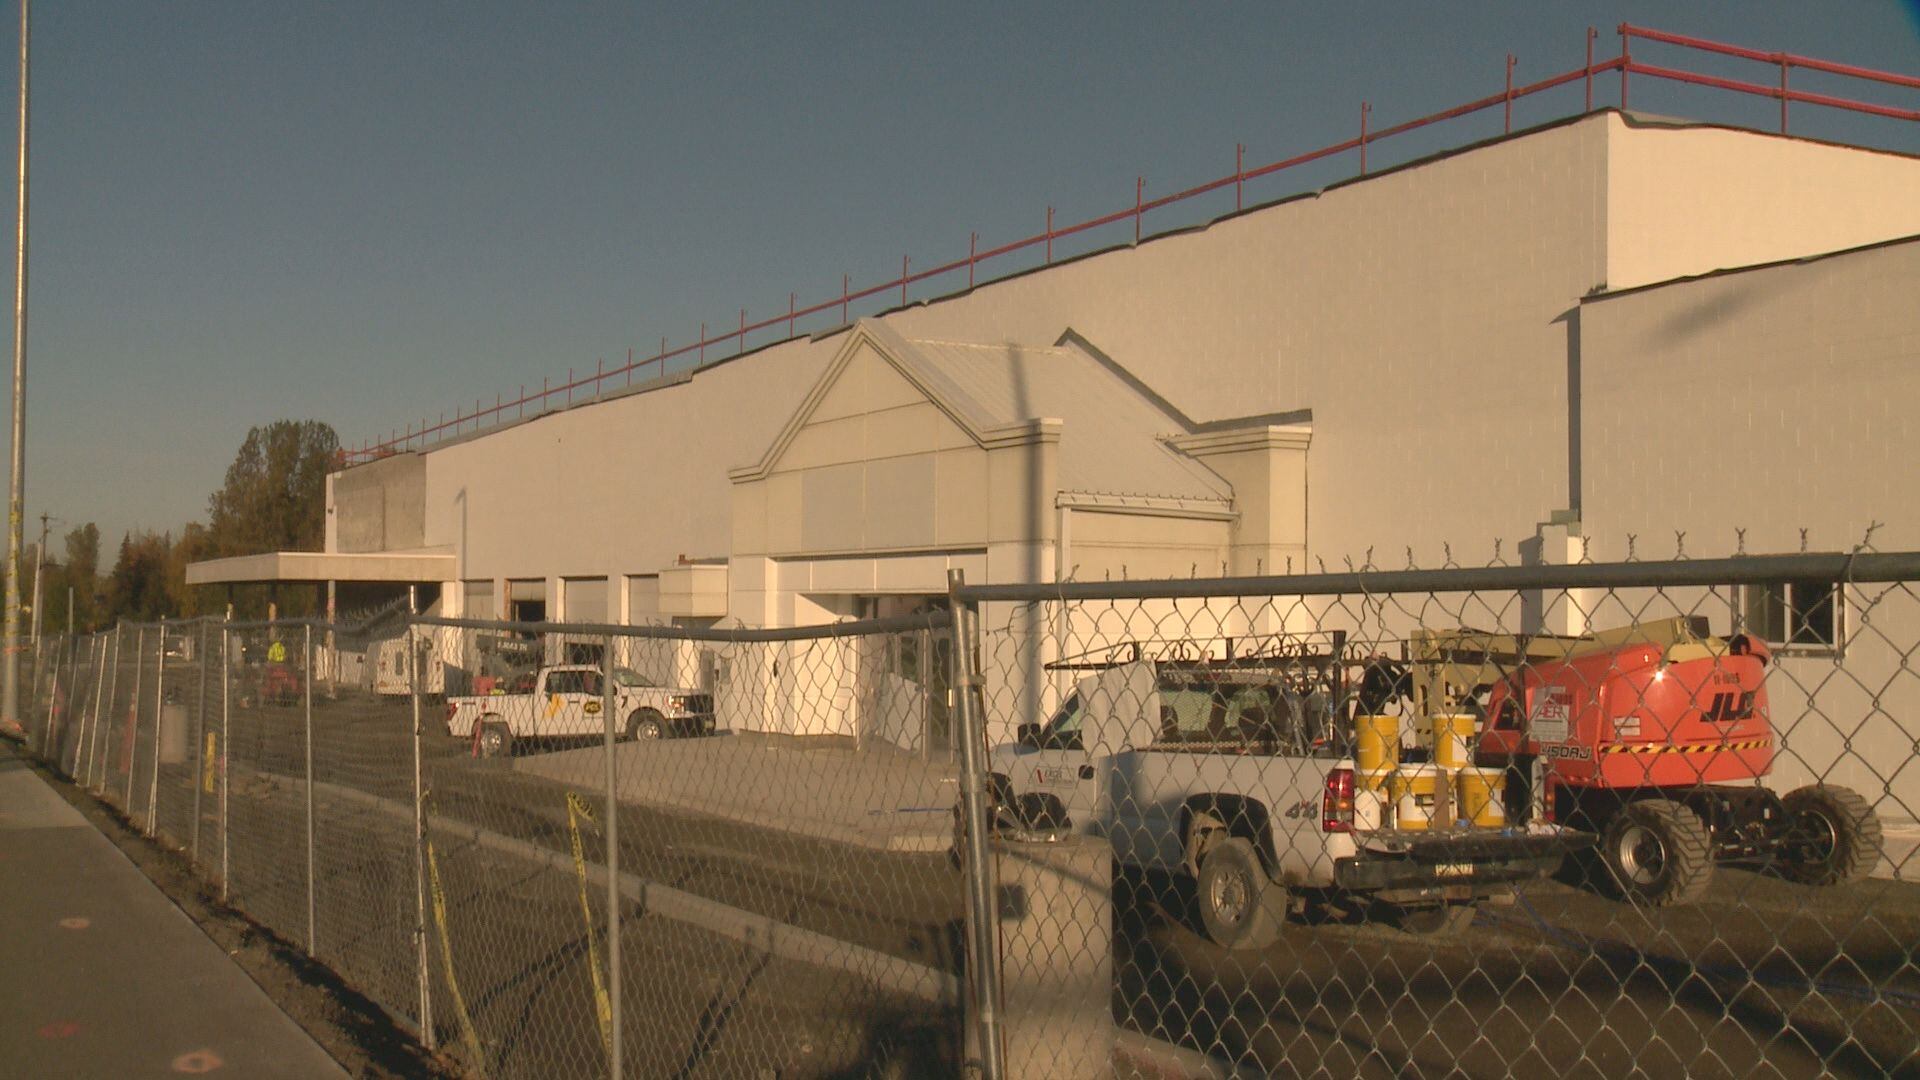 A former Sears warehouse in Anchorage will become Amazon's first sorting facility in the state